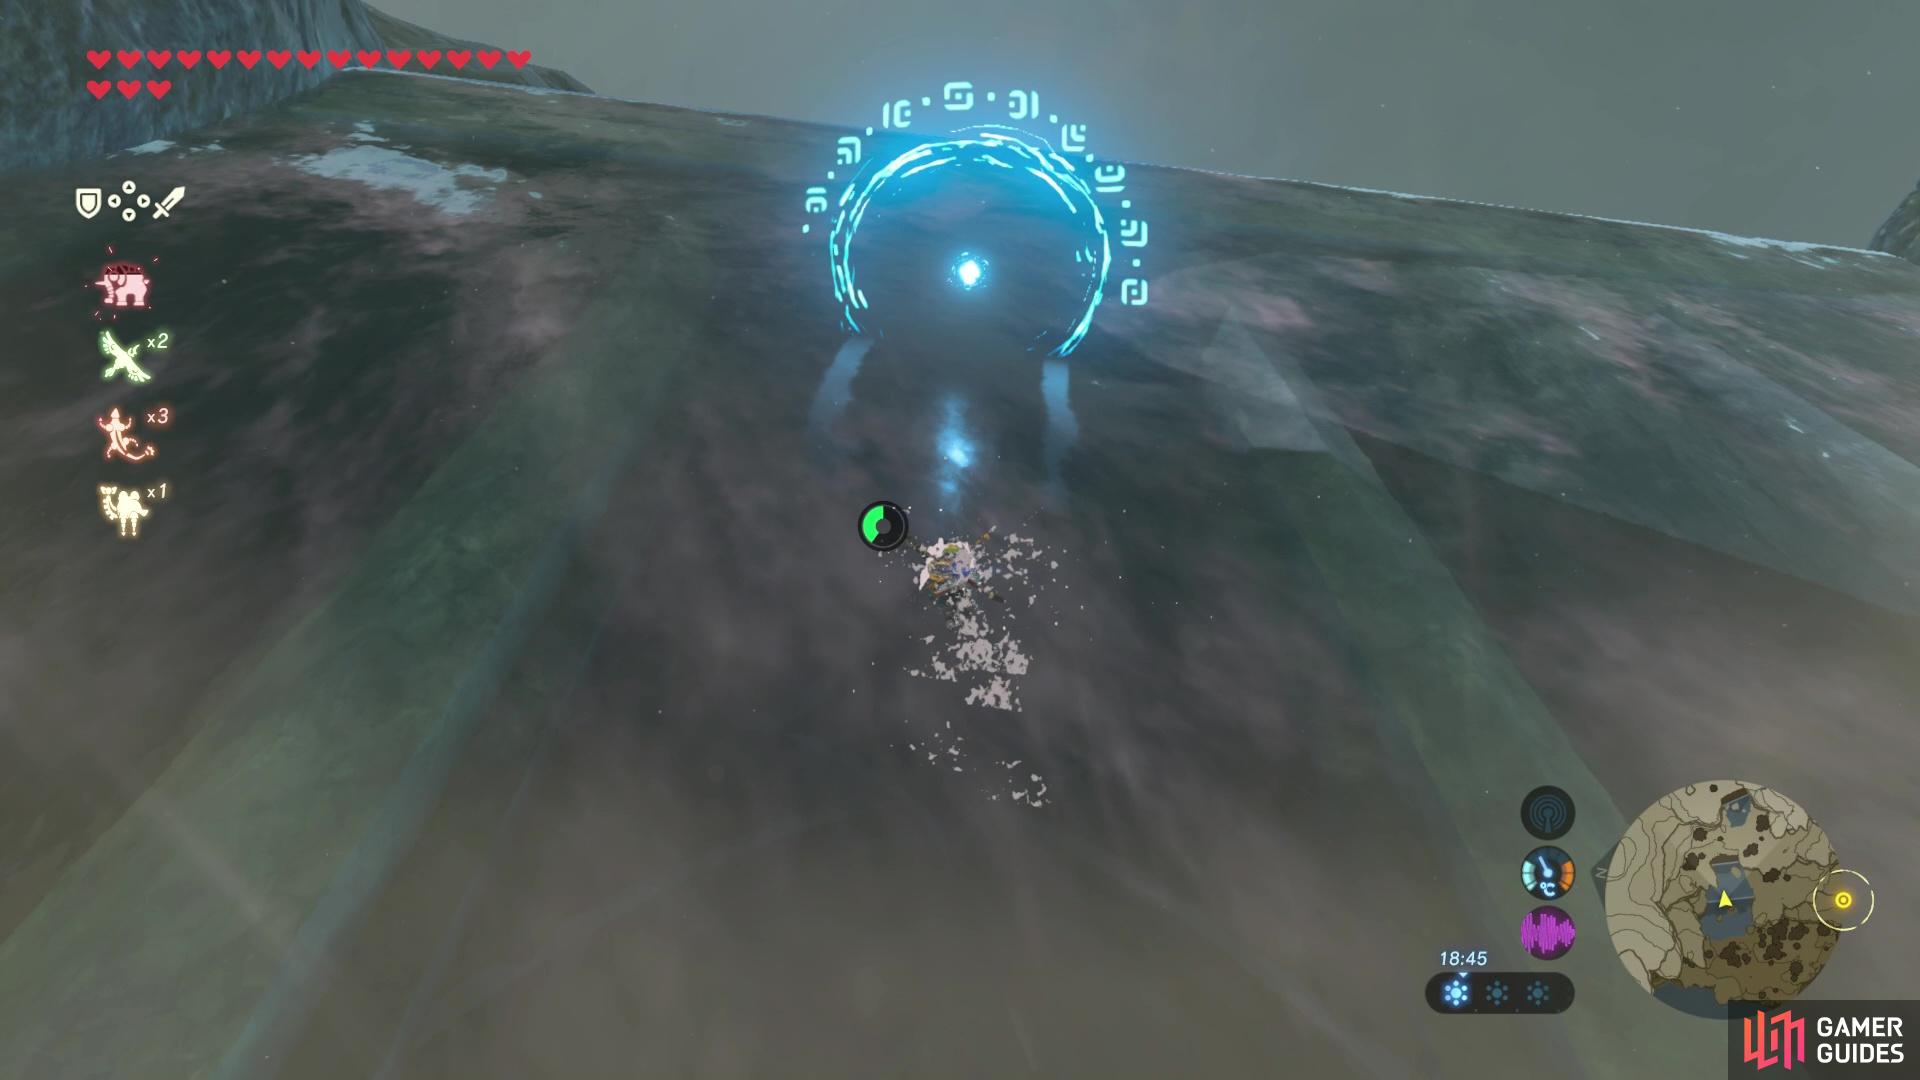 Head up the waterfall and make sure your route aligns with the blue rings.